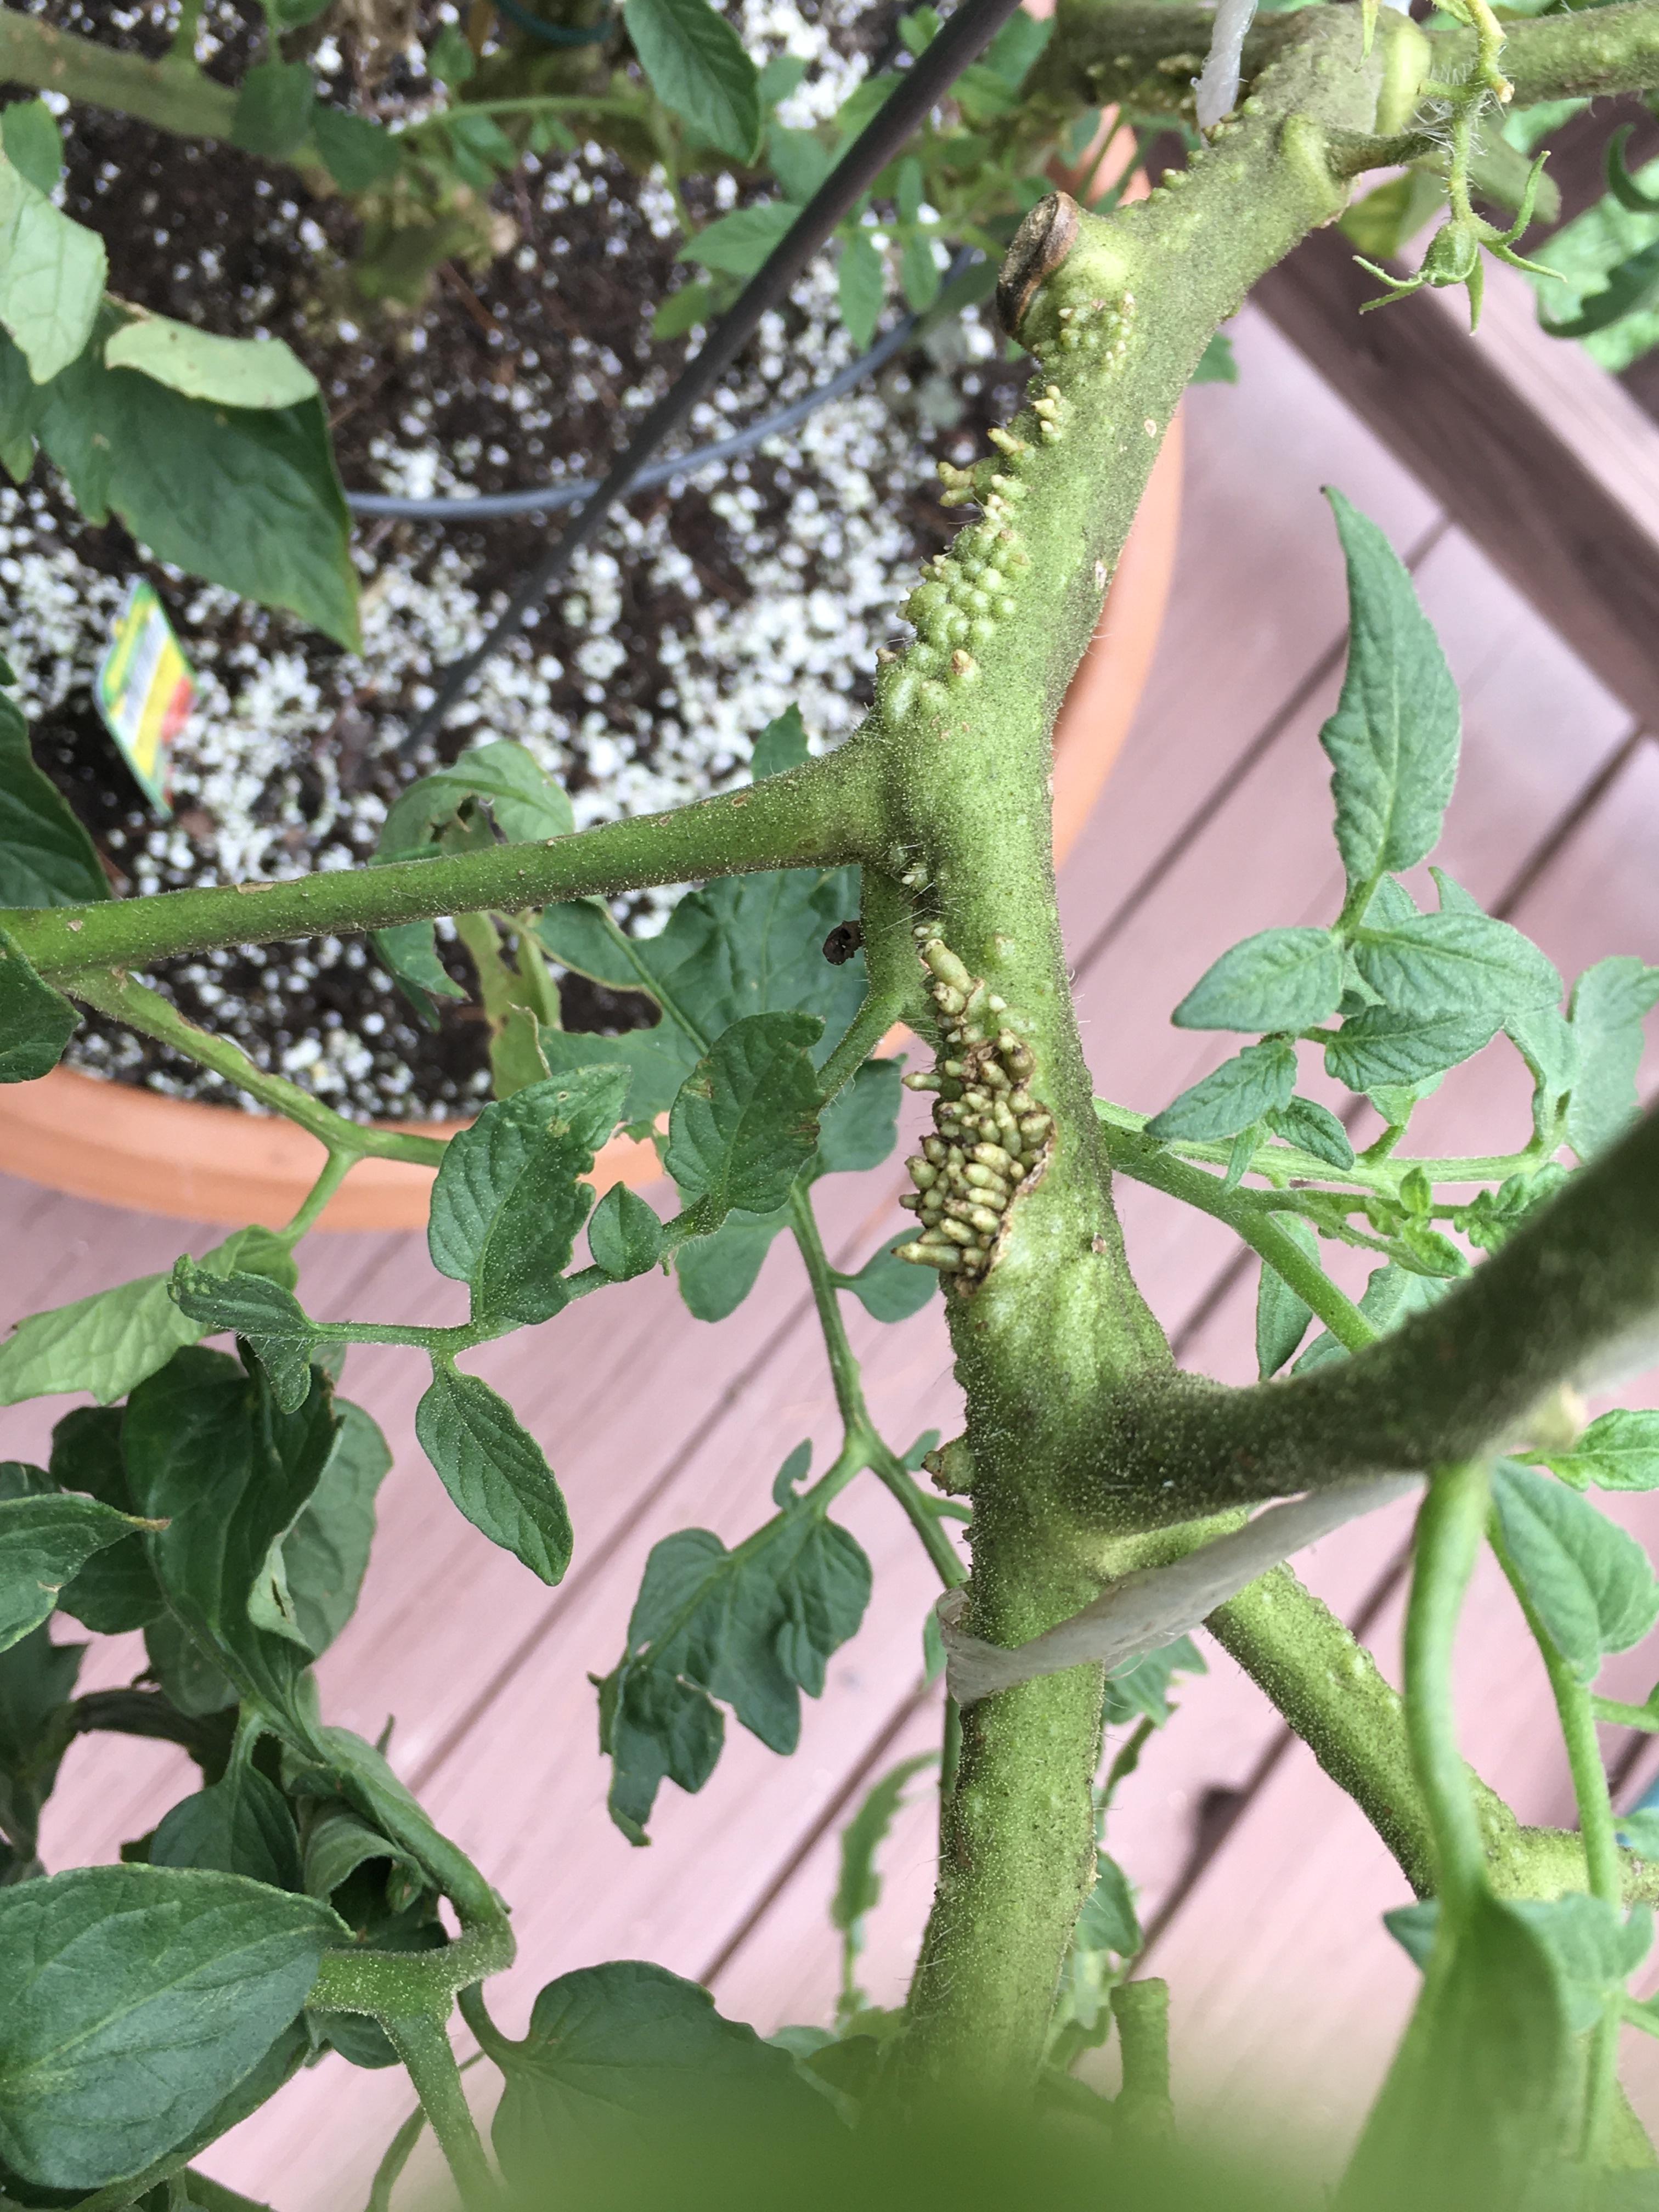 short, stubby roots growing on a tomato plant stem